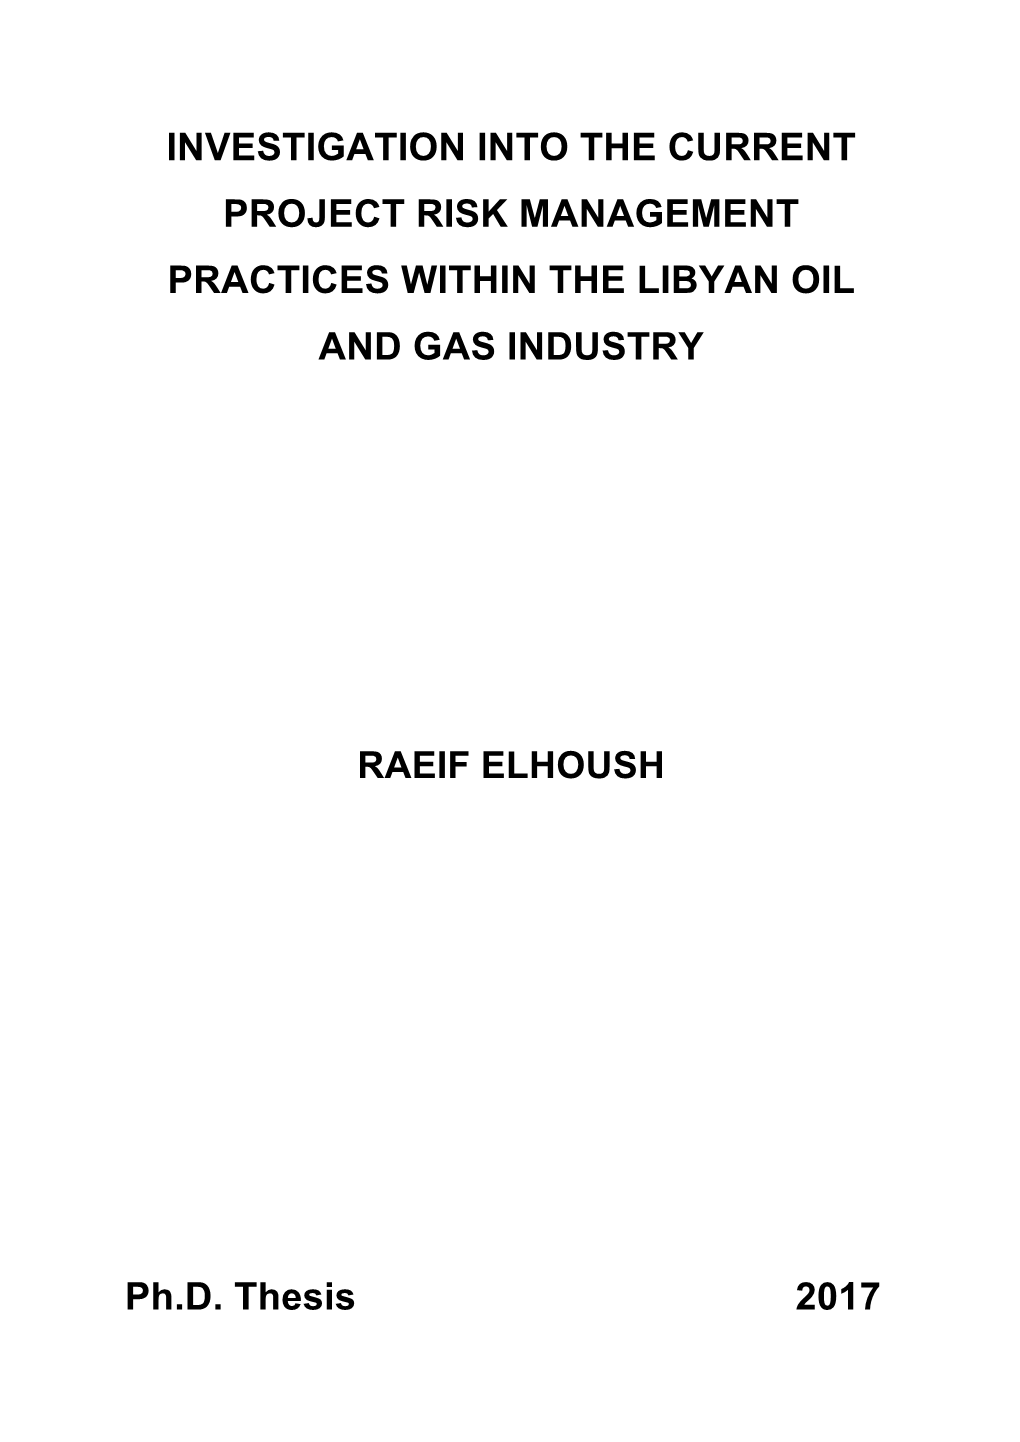 Investigation Into the Current Project Risk Management Practices Within the Libyan Oil and Gas Industry